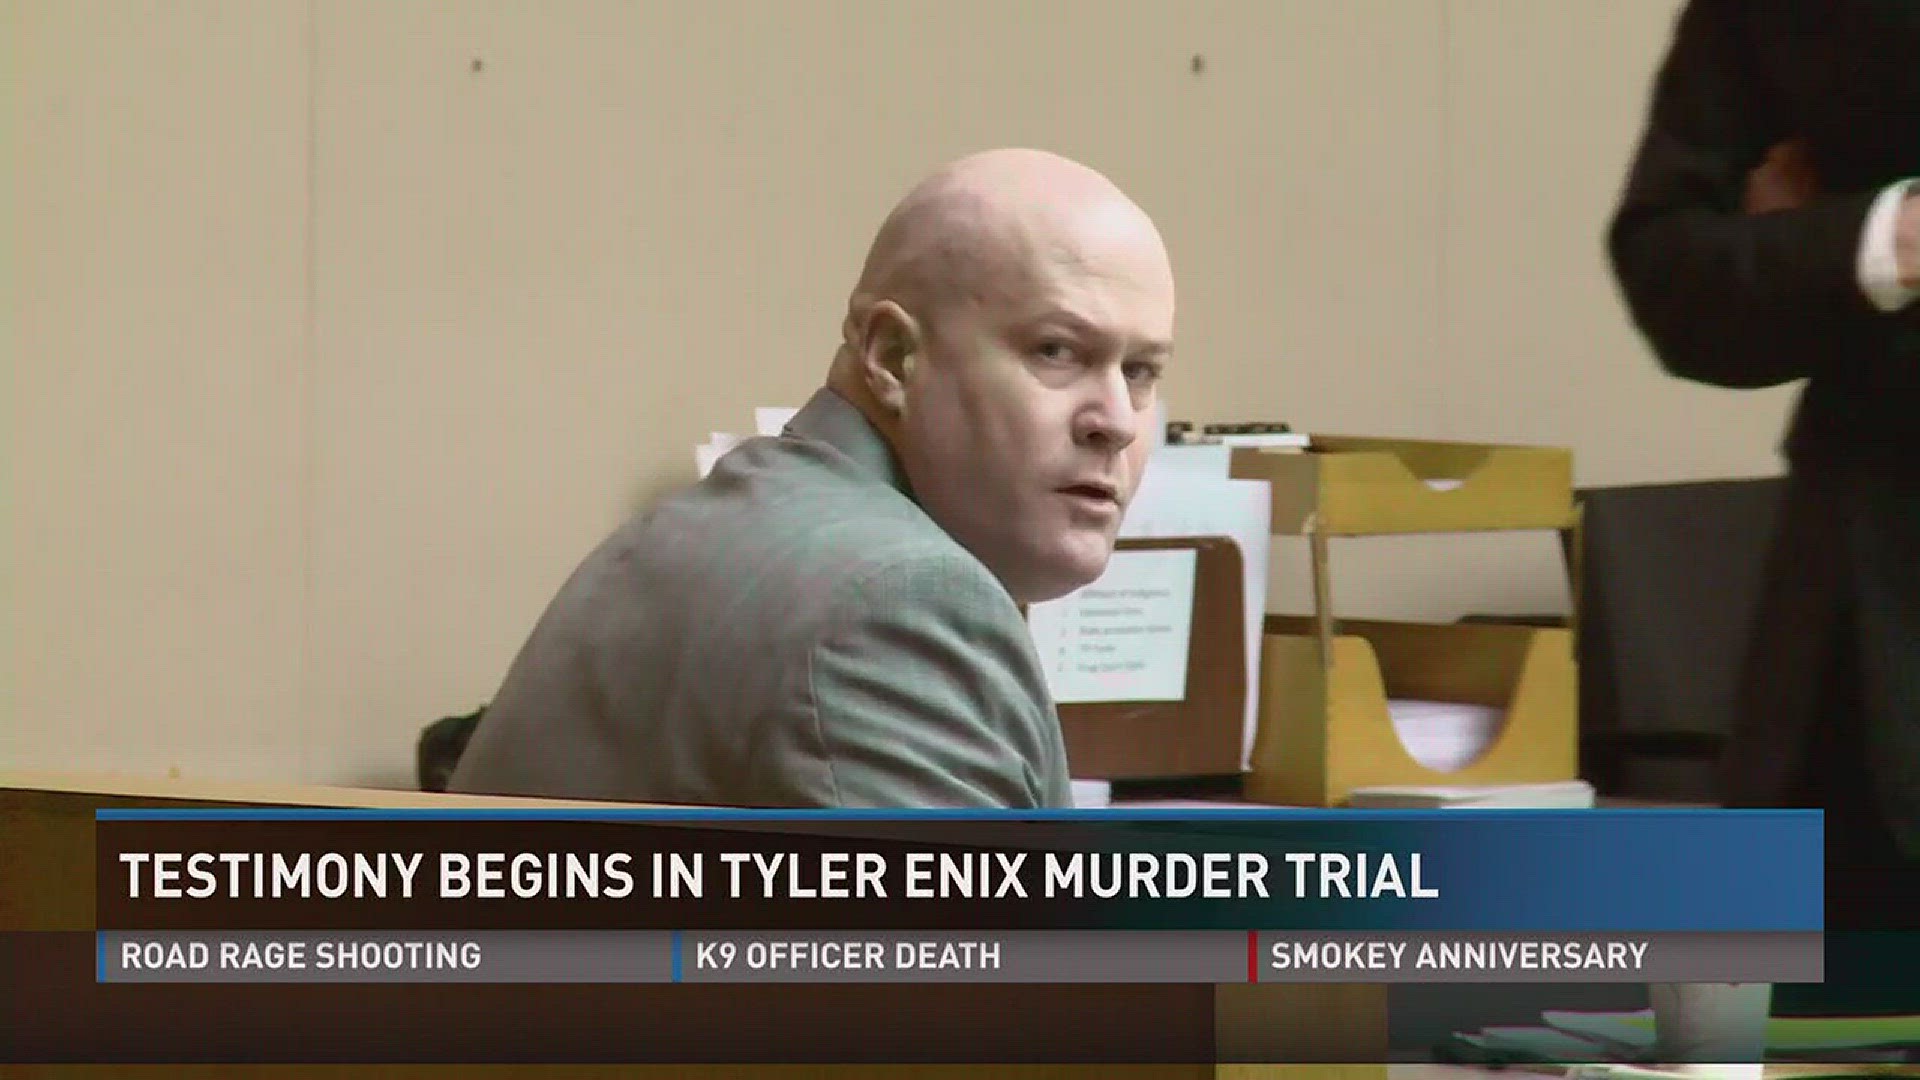 Sept. 26, 2017: A Knox County jury heard the first full day of testimony in Tyler Enix's murder trial. He's accused of killing his ex-wife Kimberly and kidnapping their then 2-year-old child in 2015.